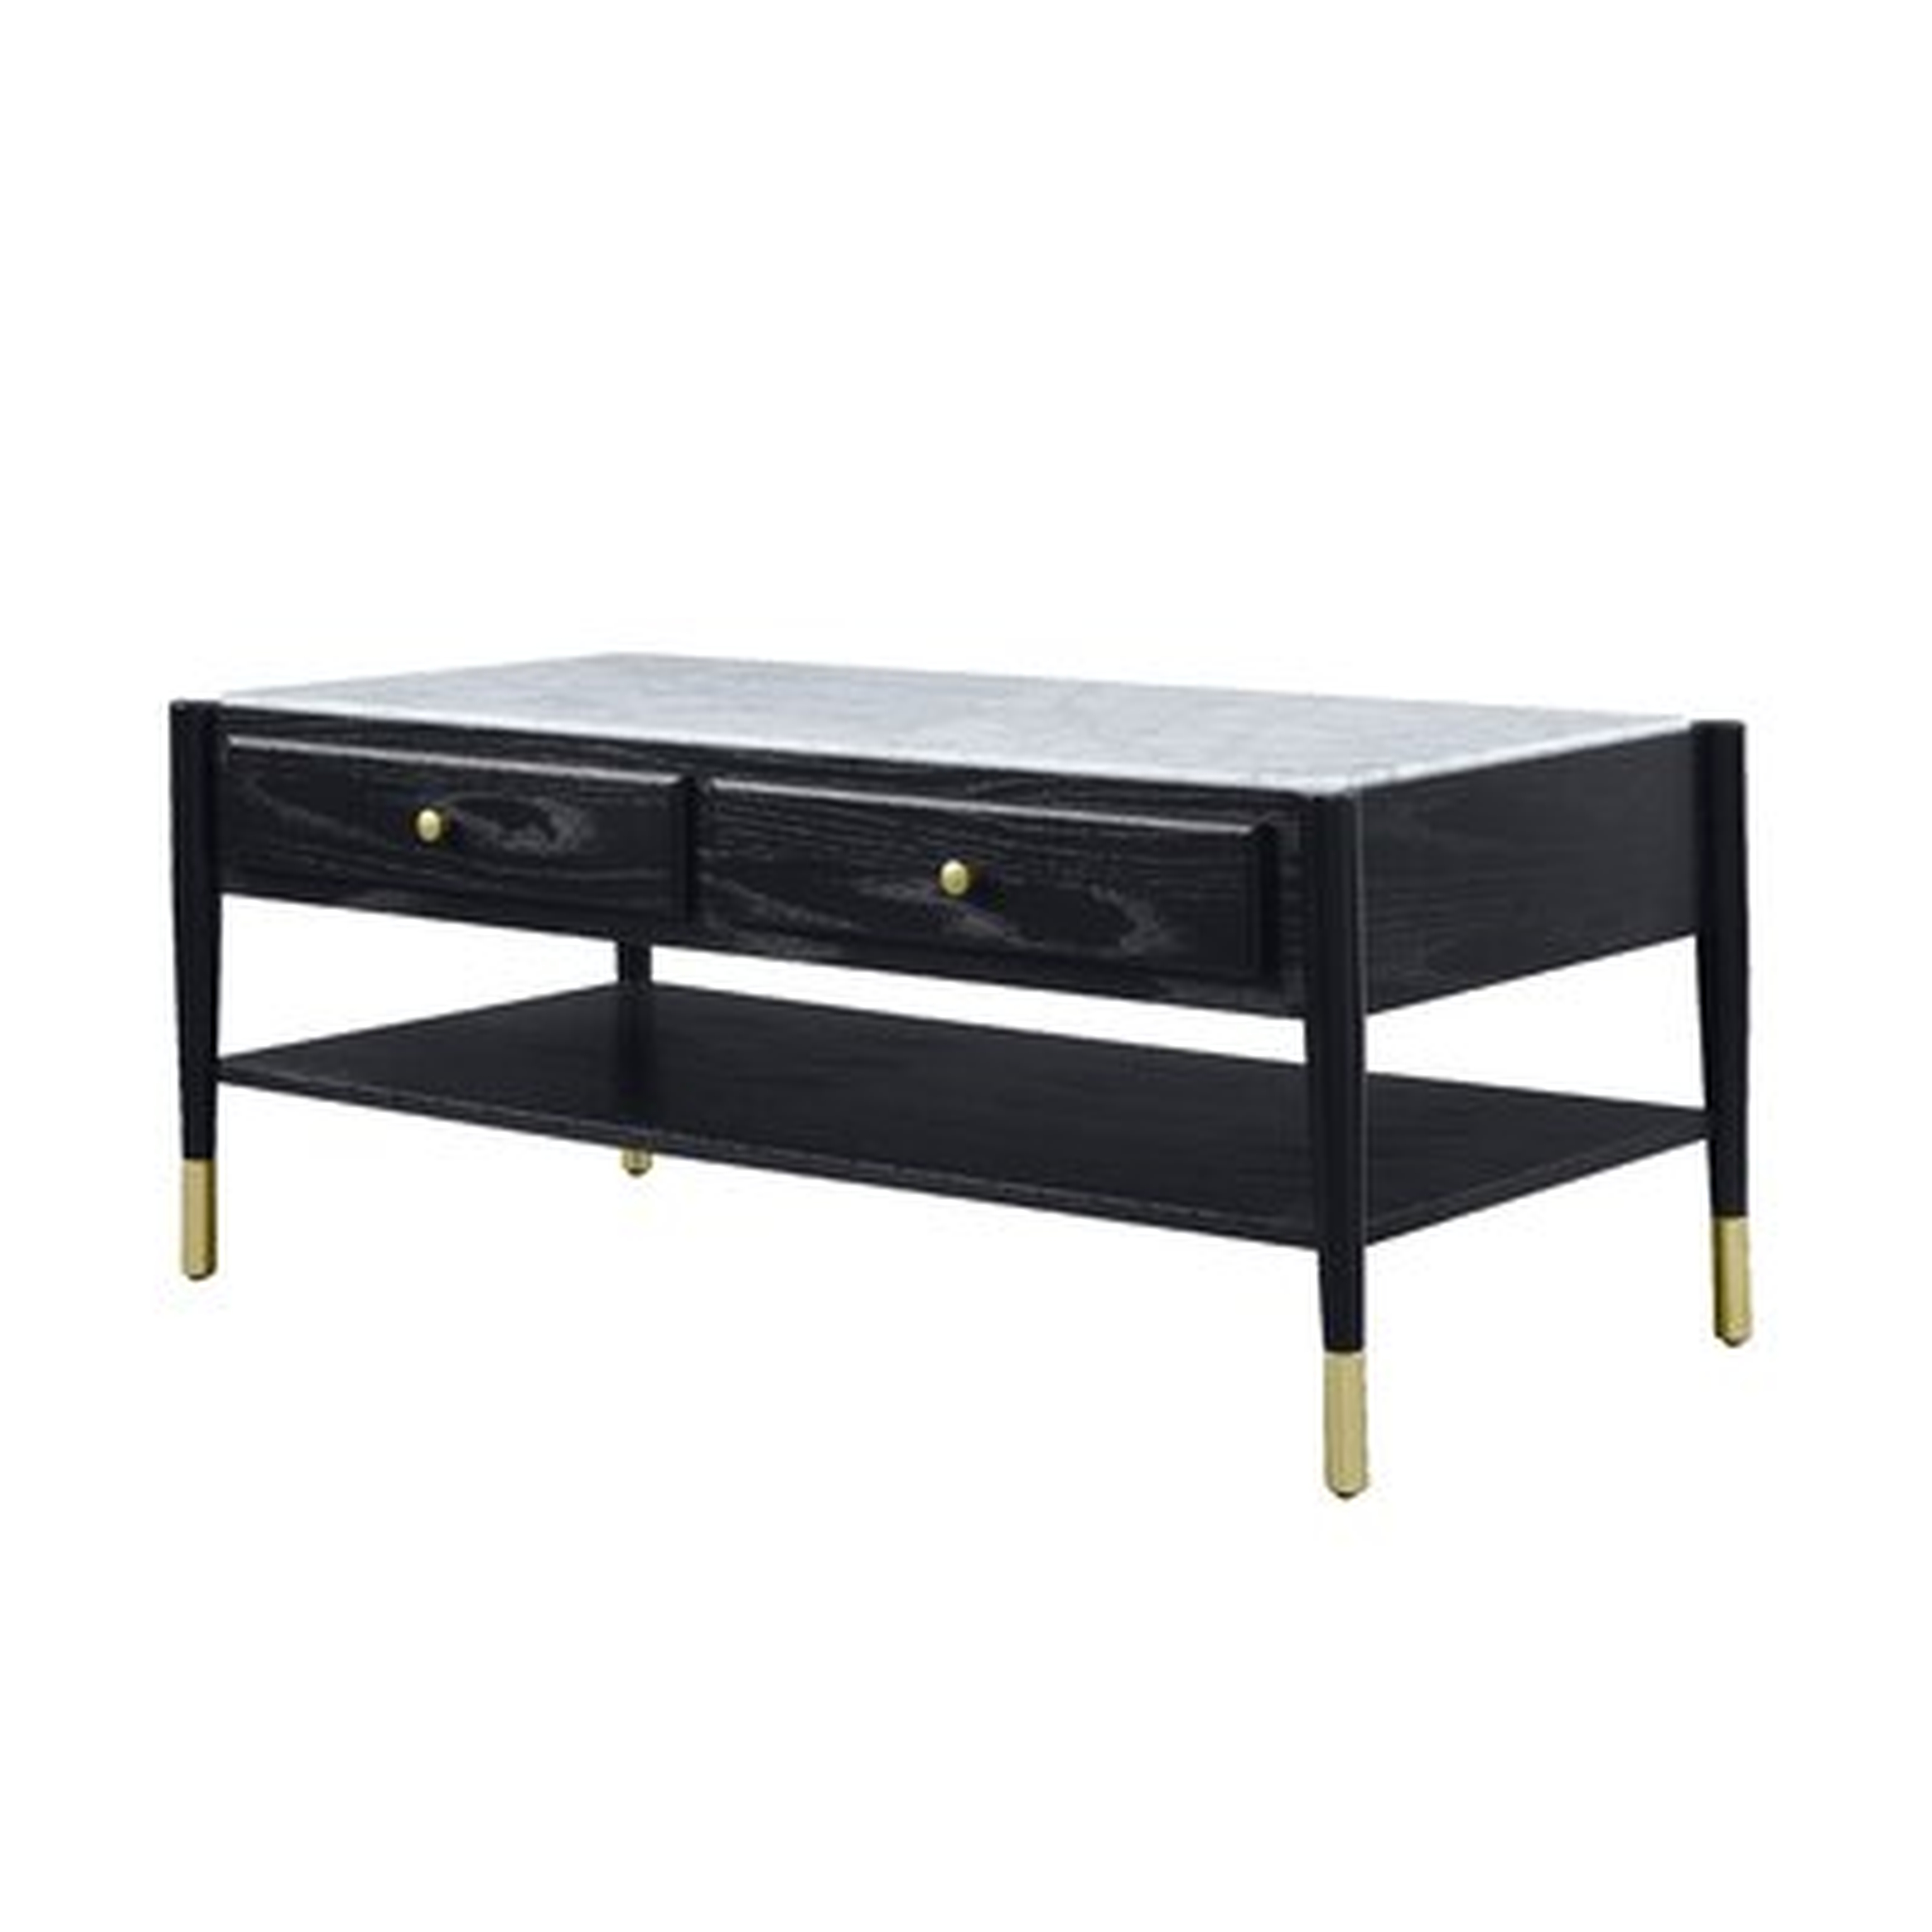 Widner Coffee Table with Storage - Wayfair